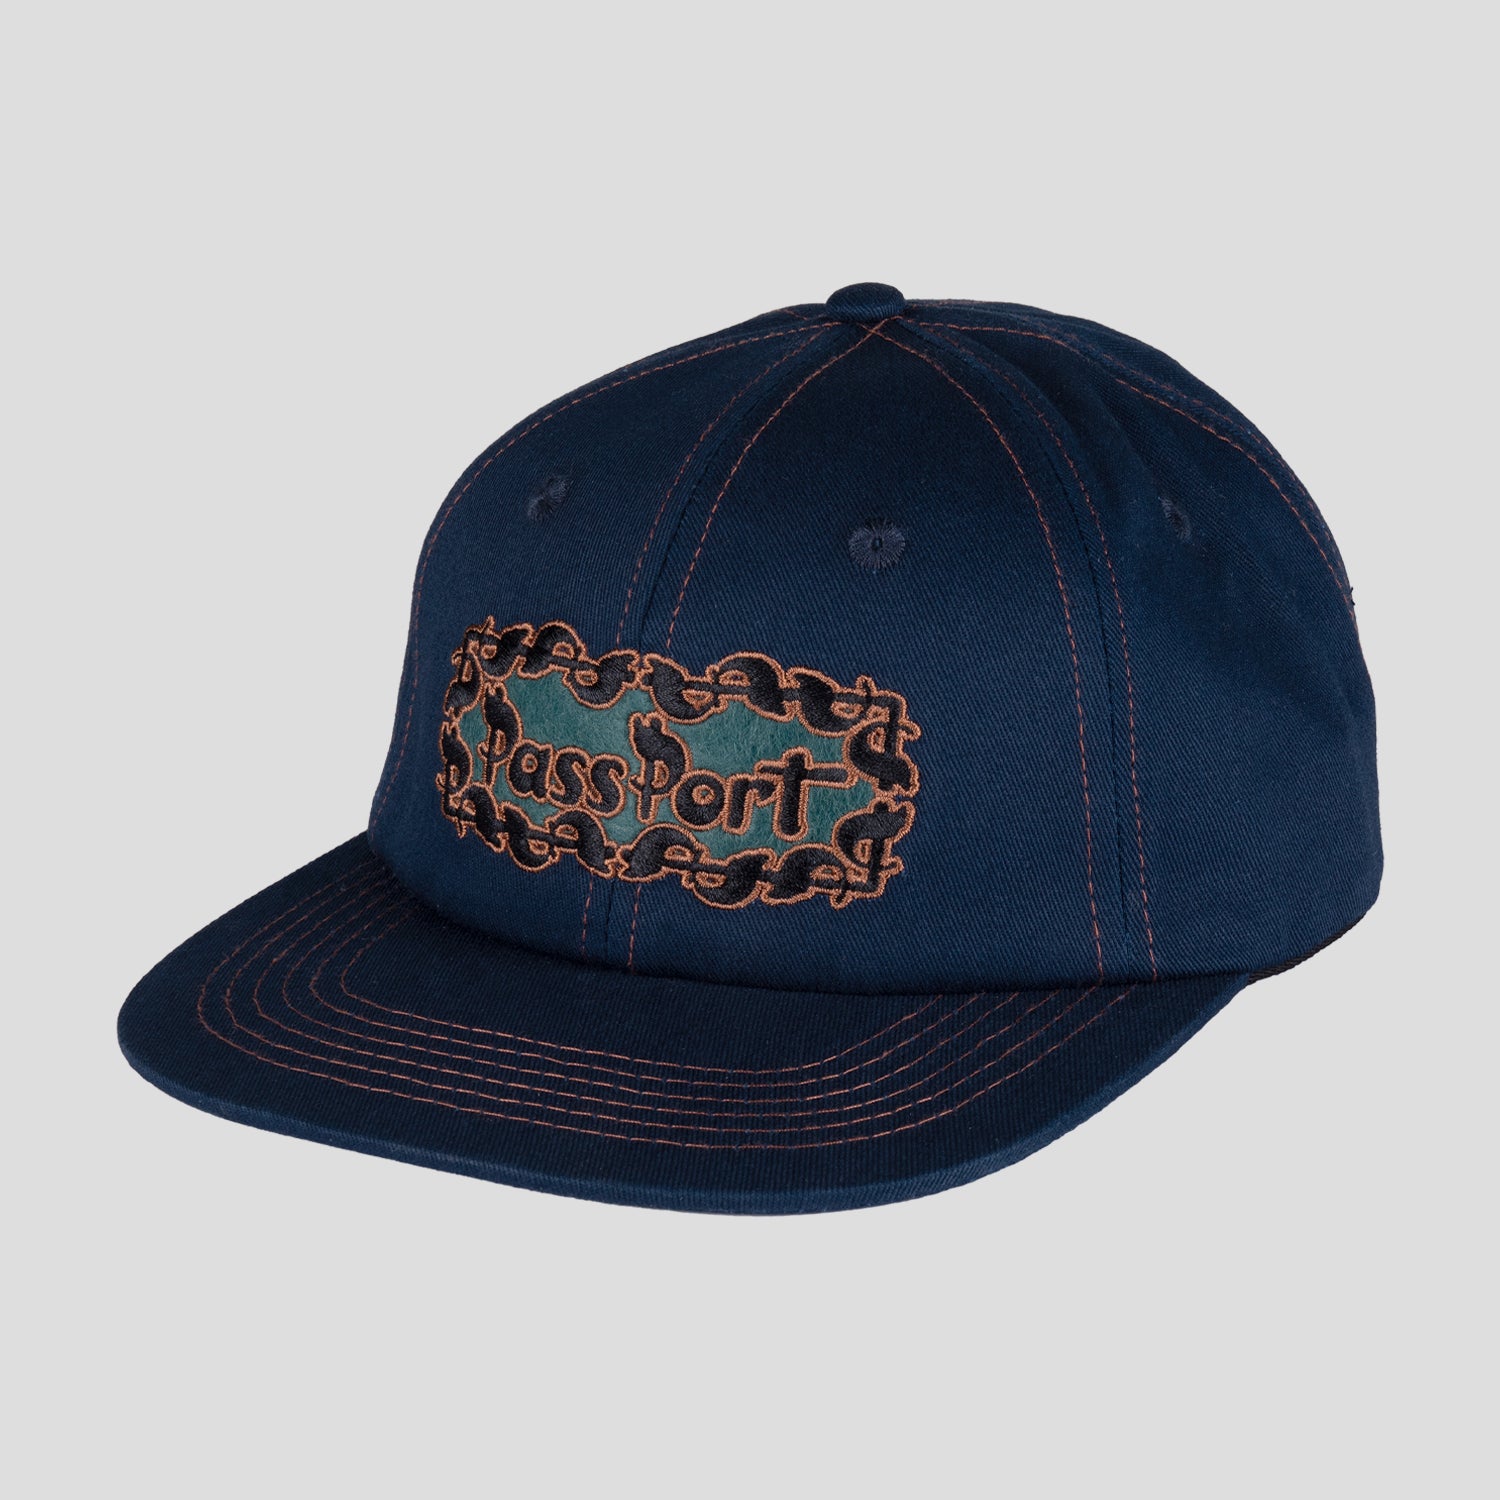 Pass~Port Pattoned Casual Cap - Navy